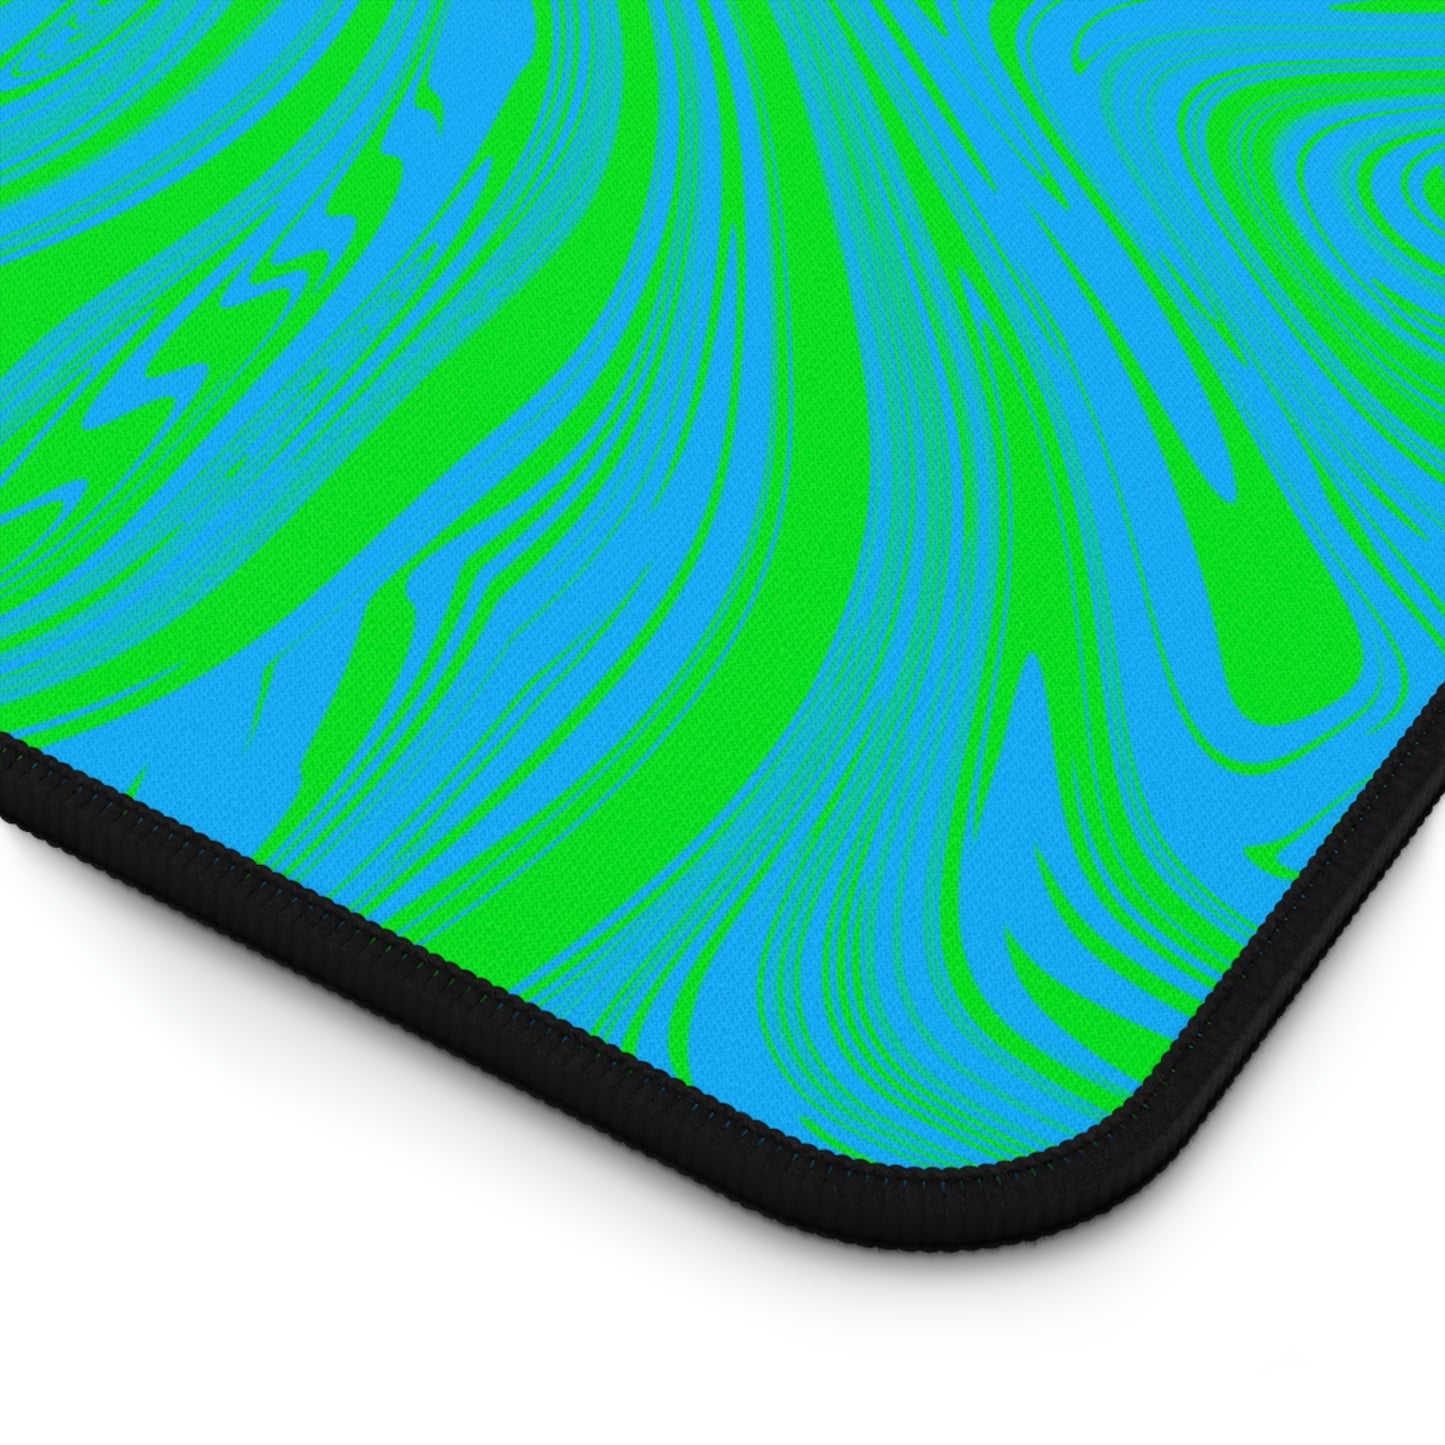 The corner of a 12" x 18" desk mat with blue and green swirls.